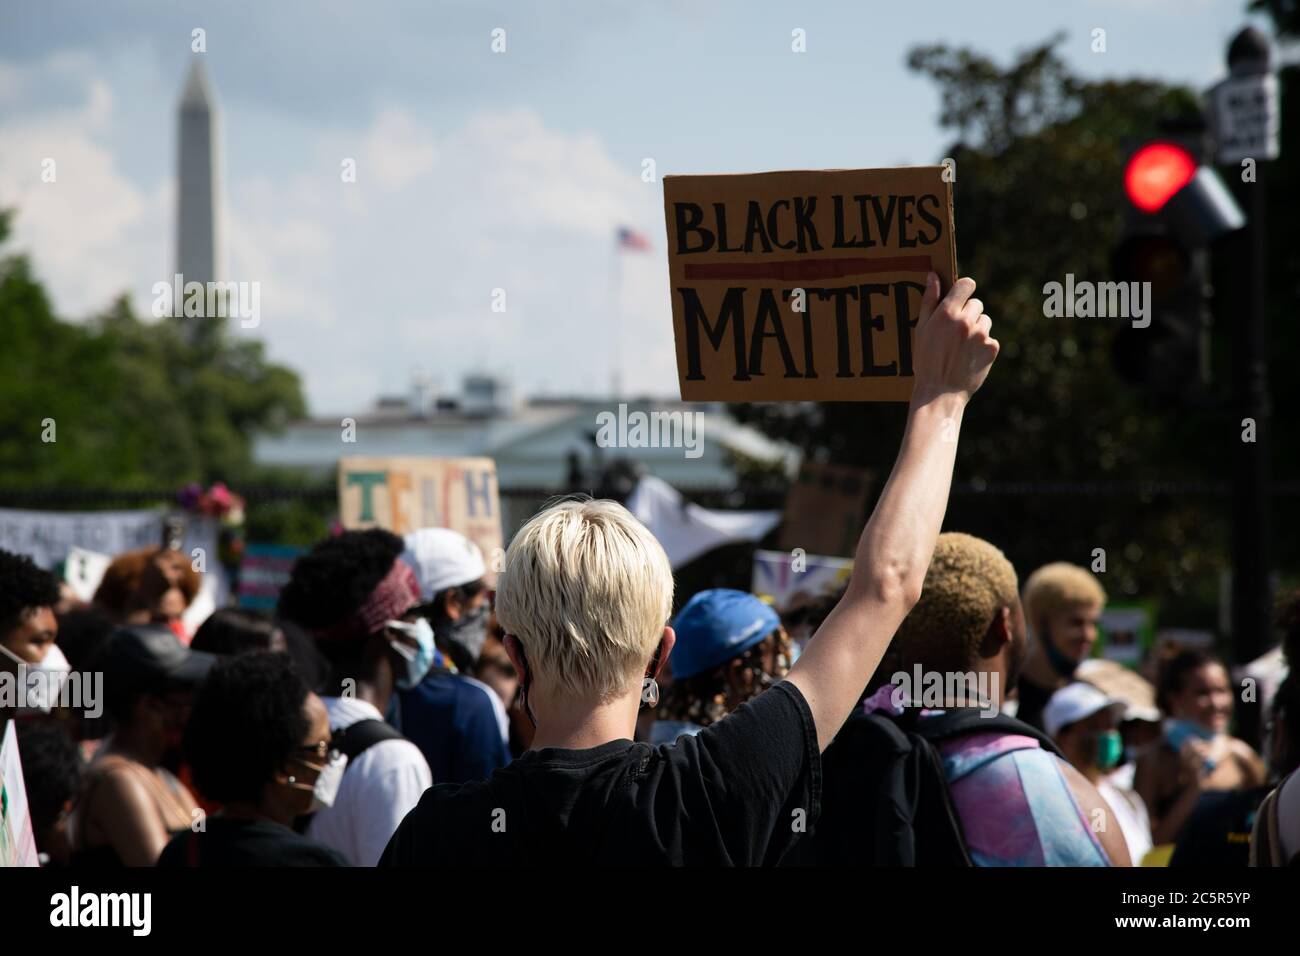 A racial justice protester holds a sign in Black Lives Matter Plaza near the White House in Washington, DC, on July 4, 2020, amid the coronavirus pandemic. Following a divisive speech by President Trump at Mt. Rushmore the night before, Fourth of July celebrations in Washington have proved controversial for the second year running C as racial justice protesters gathered for demonstrations across the city, the PresidentÕs Salute to America celebration is going ahead as planned despite CDC warnings about COVID-19 and numerous objections from local officials. (Graeme Sloan/Sipa USA) Stock Photo